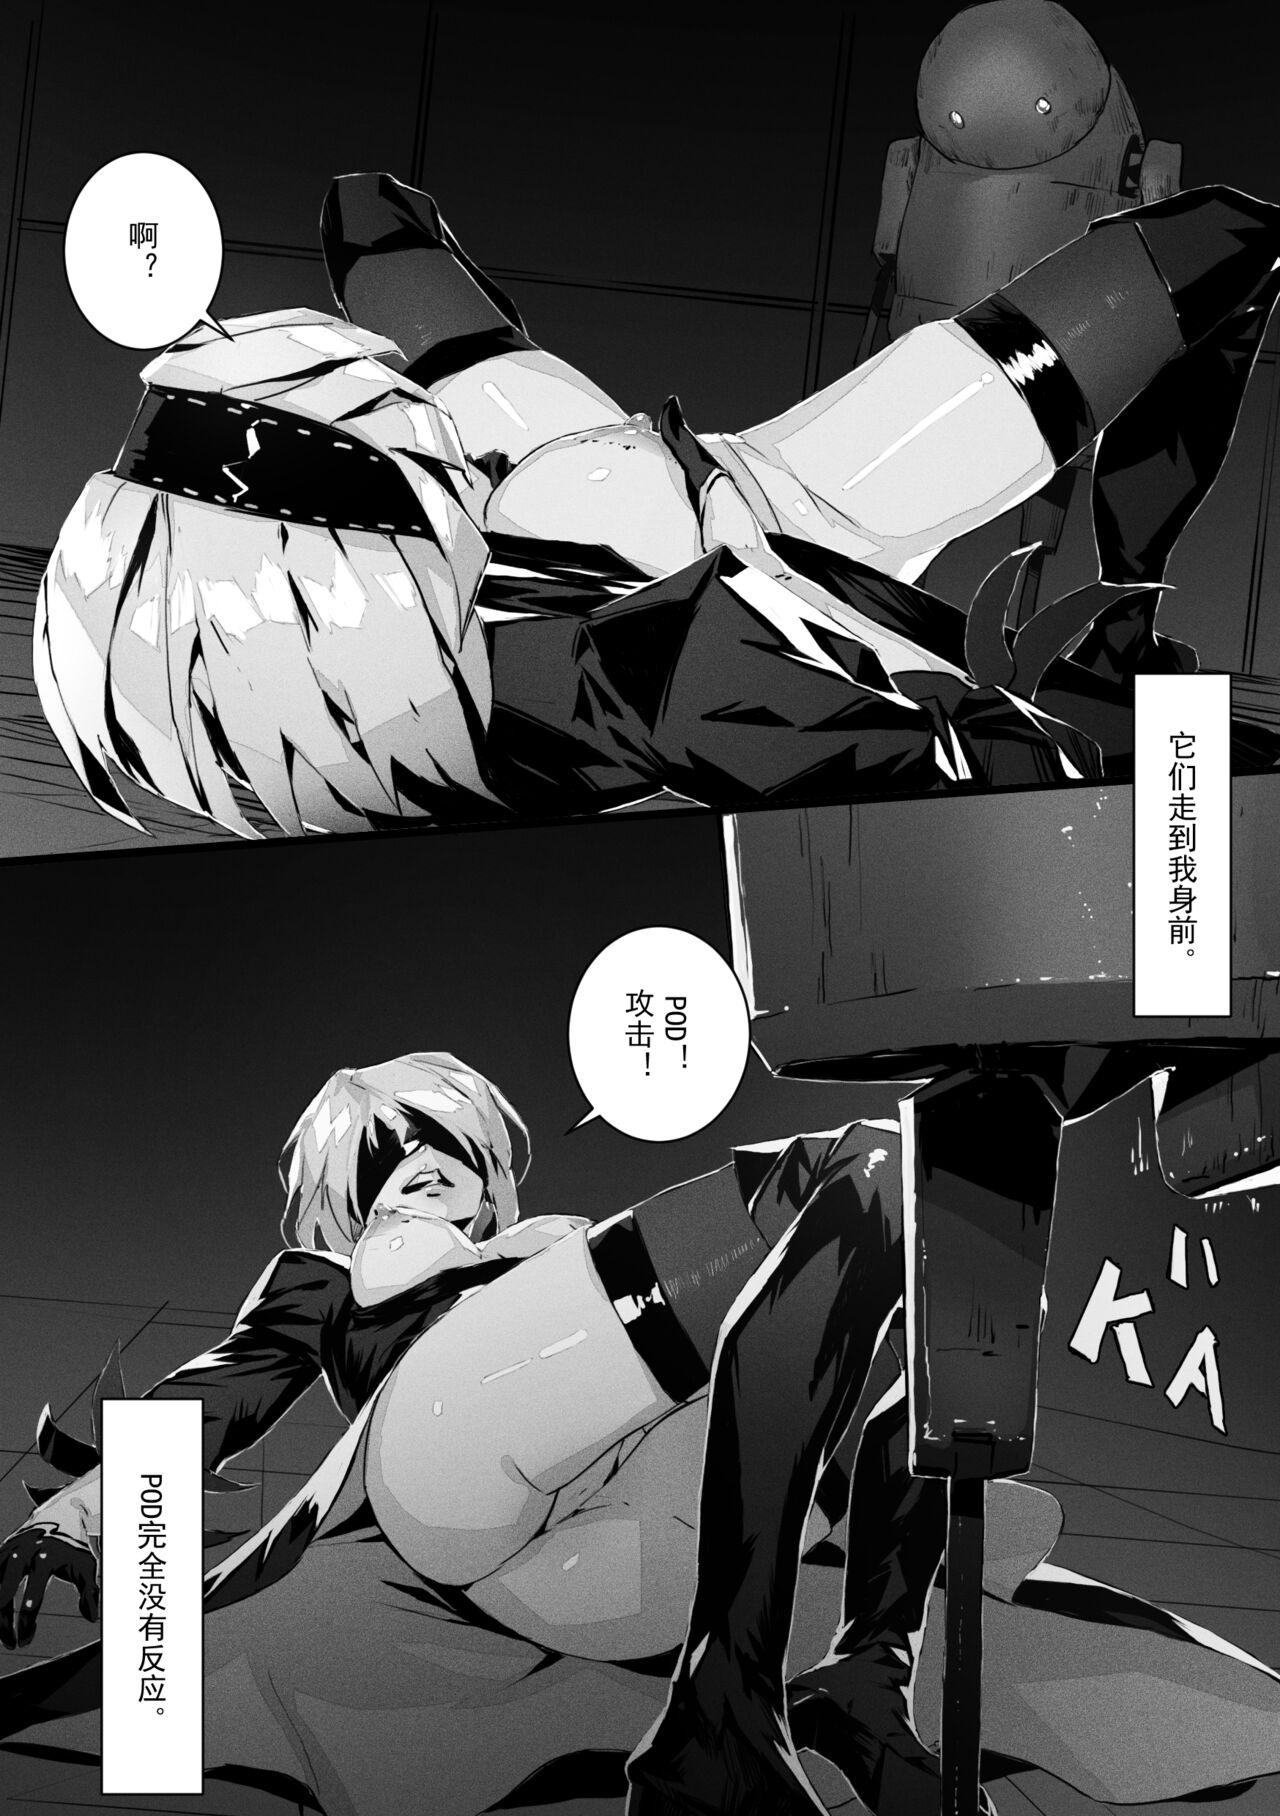  2B In Trouble Part 1-6 - Nier automata Real Amature Porn - Page 10